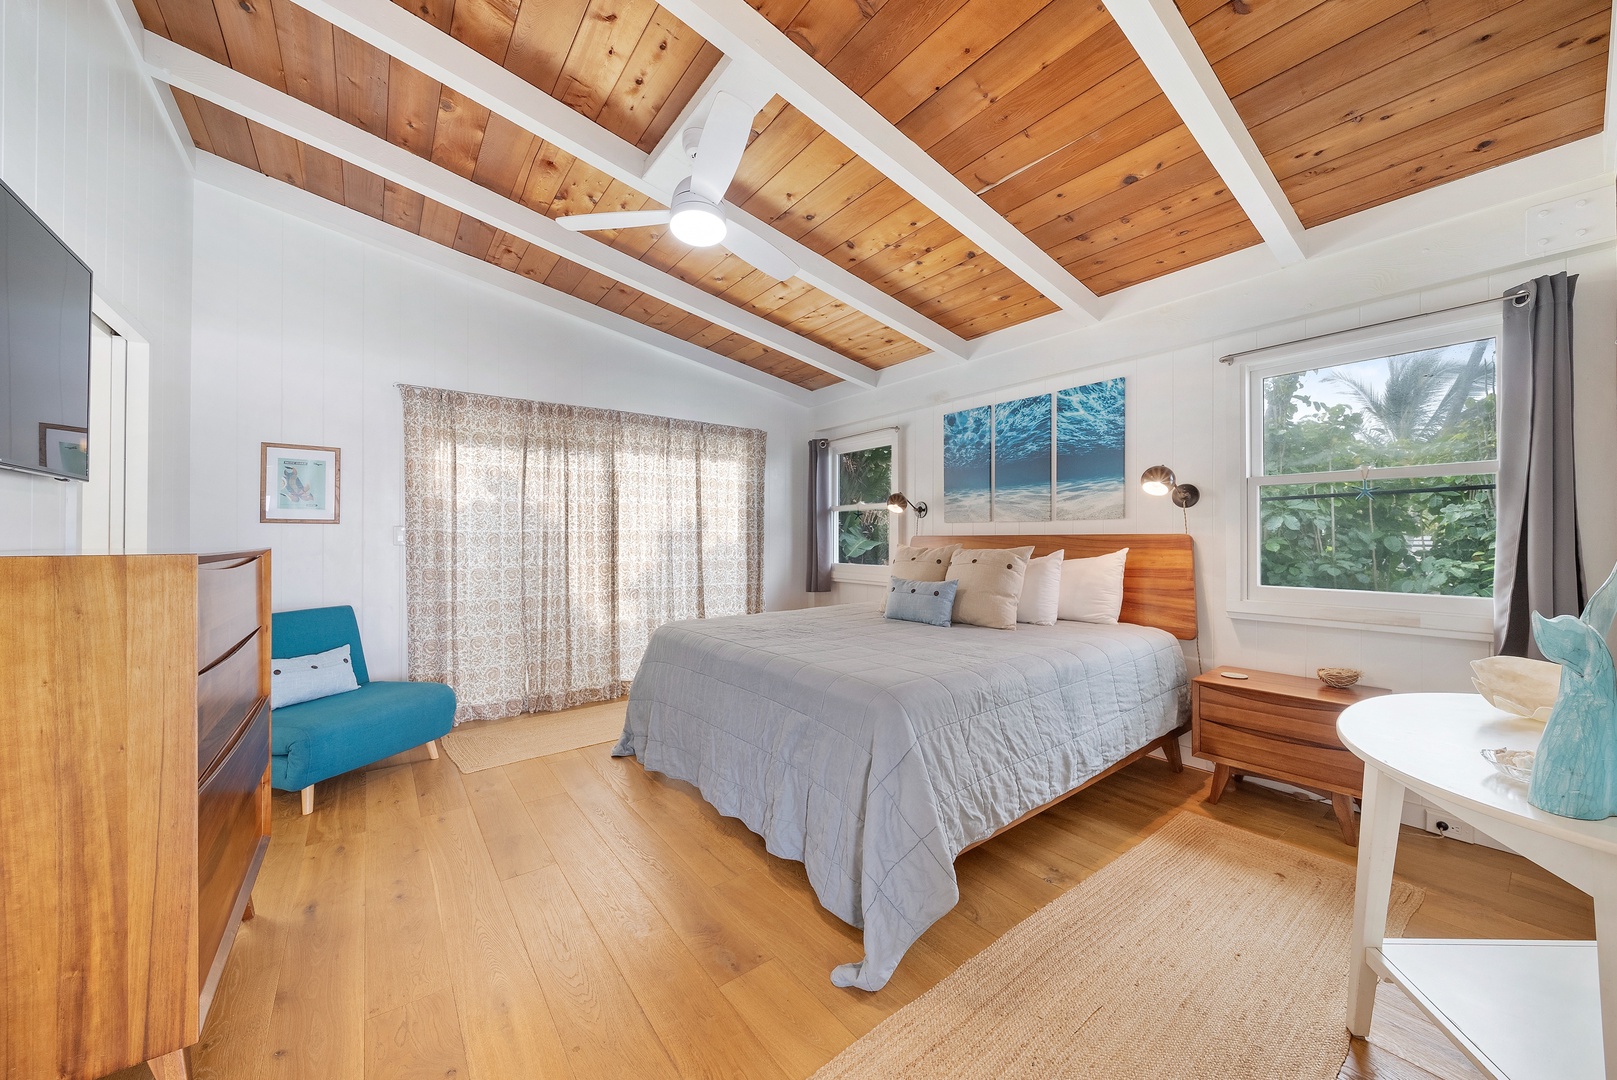 Haleiwa Vacation Rentals, Surfer's Paradise - The primary bedroom with king and a fold-out chair that coverts into a sleeping space for 1 child